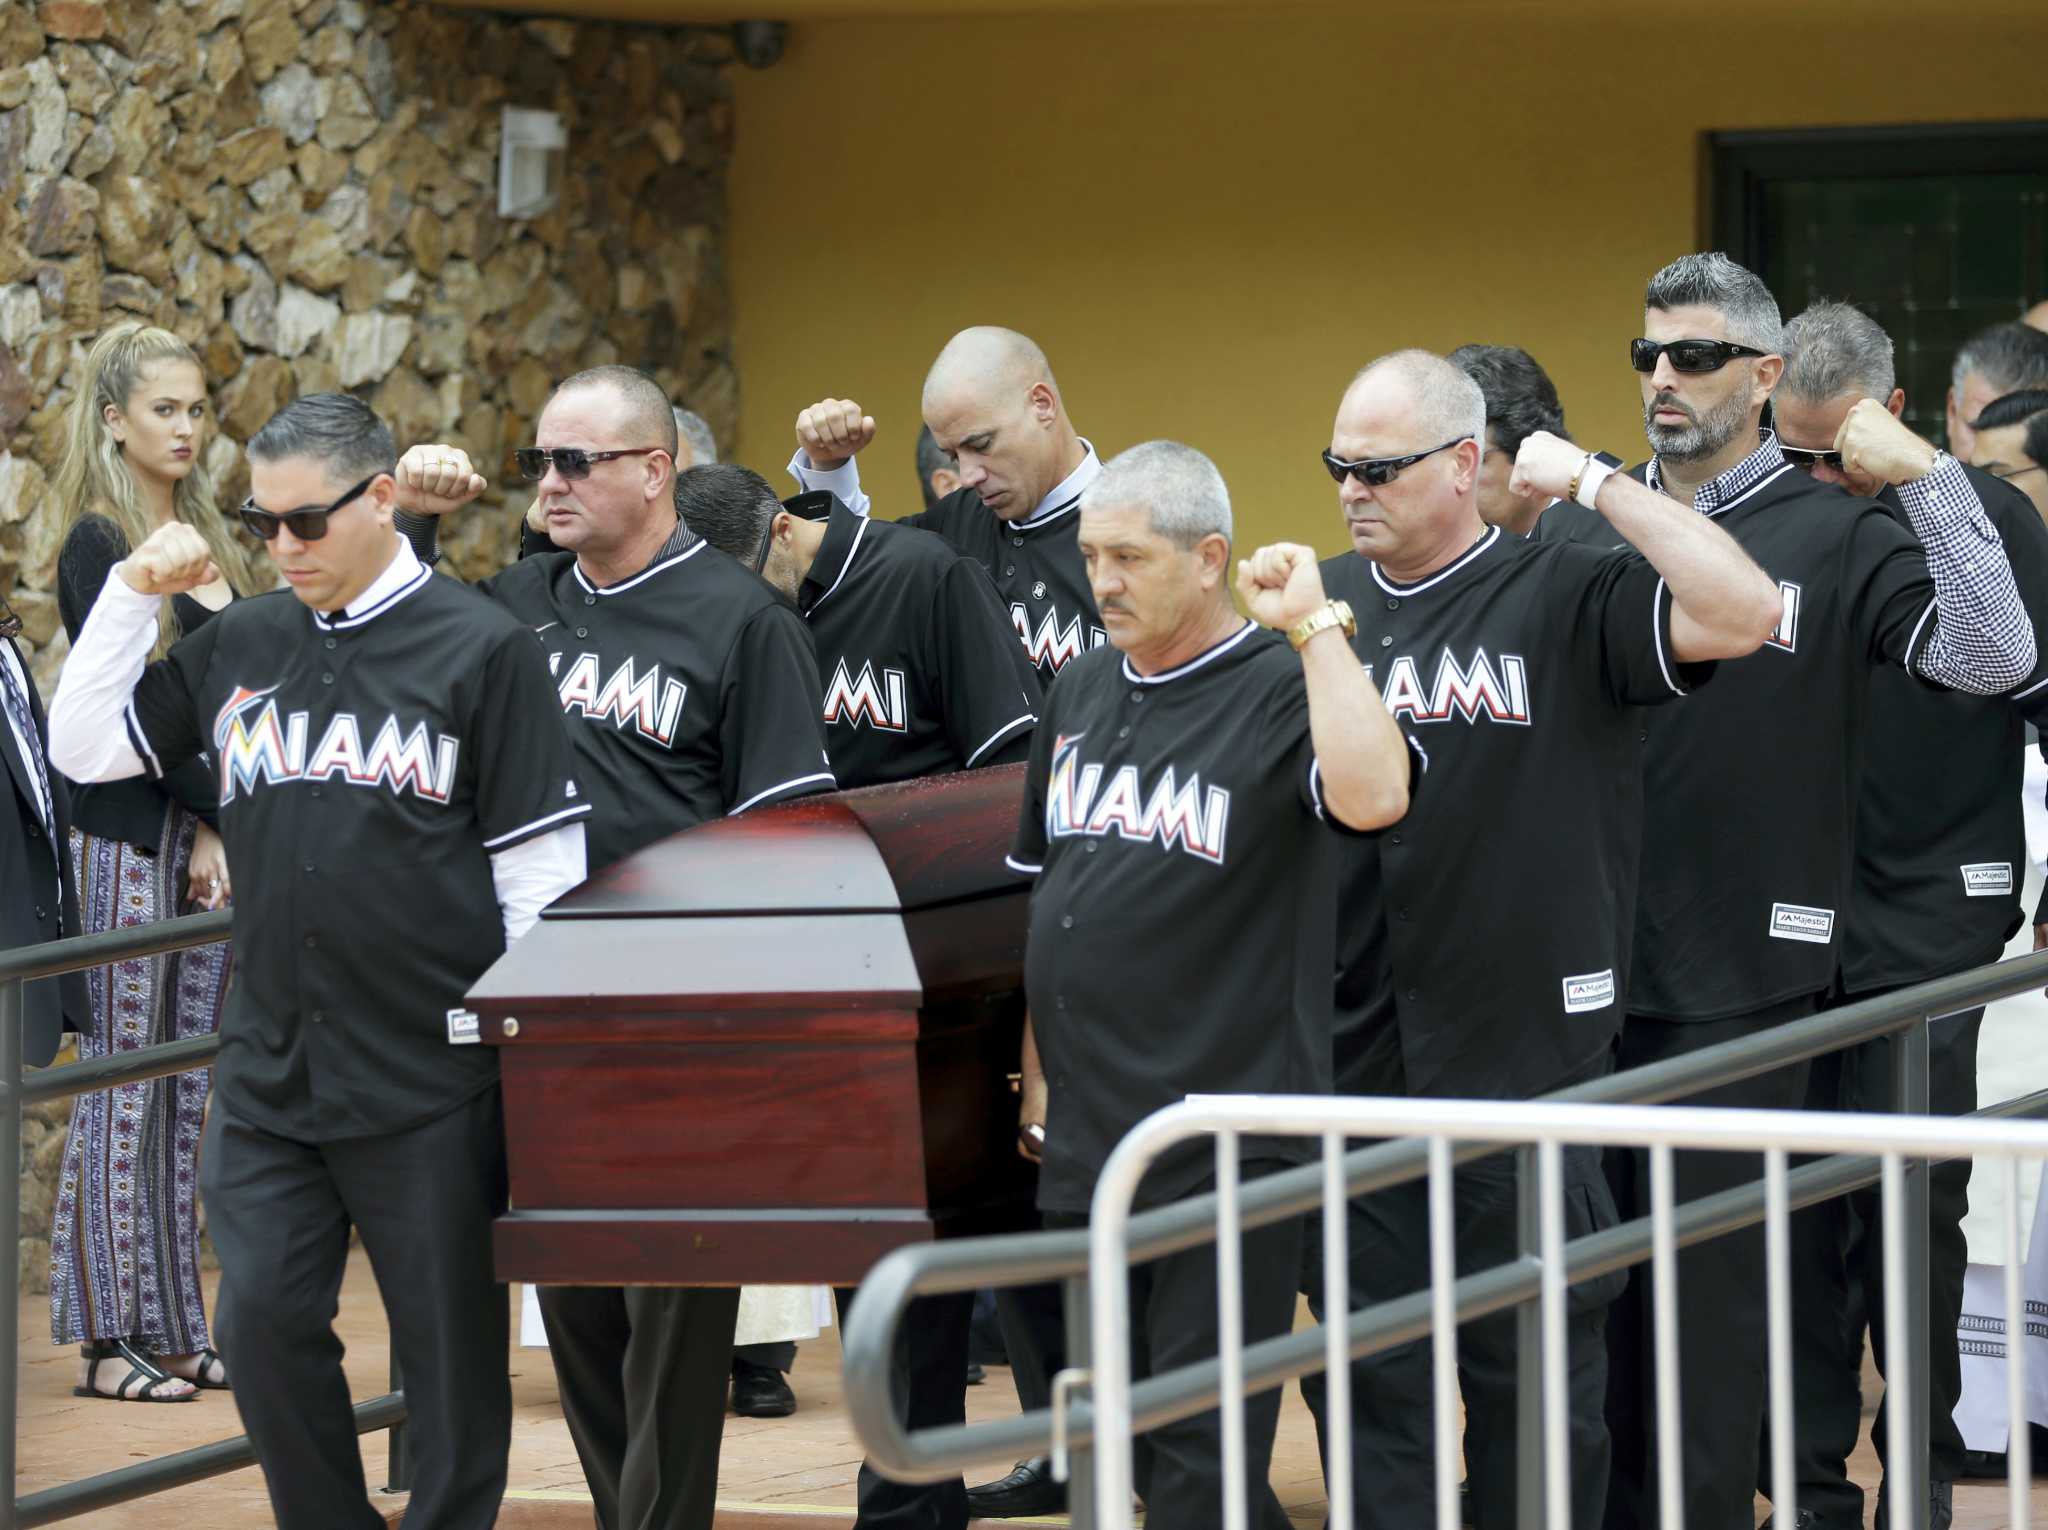 Jose Fernandez remembered at funeral for big personality and fun